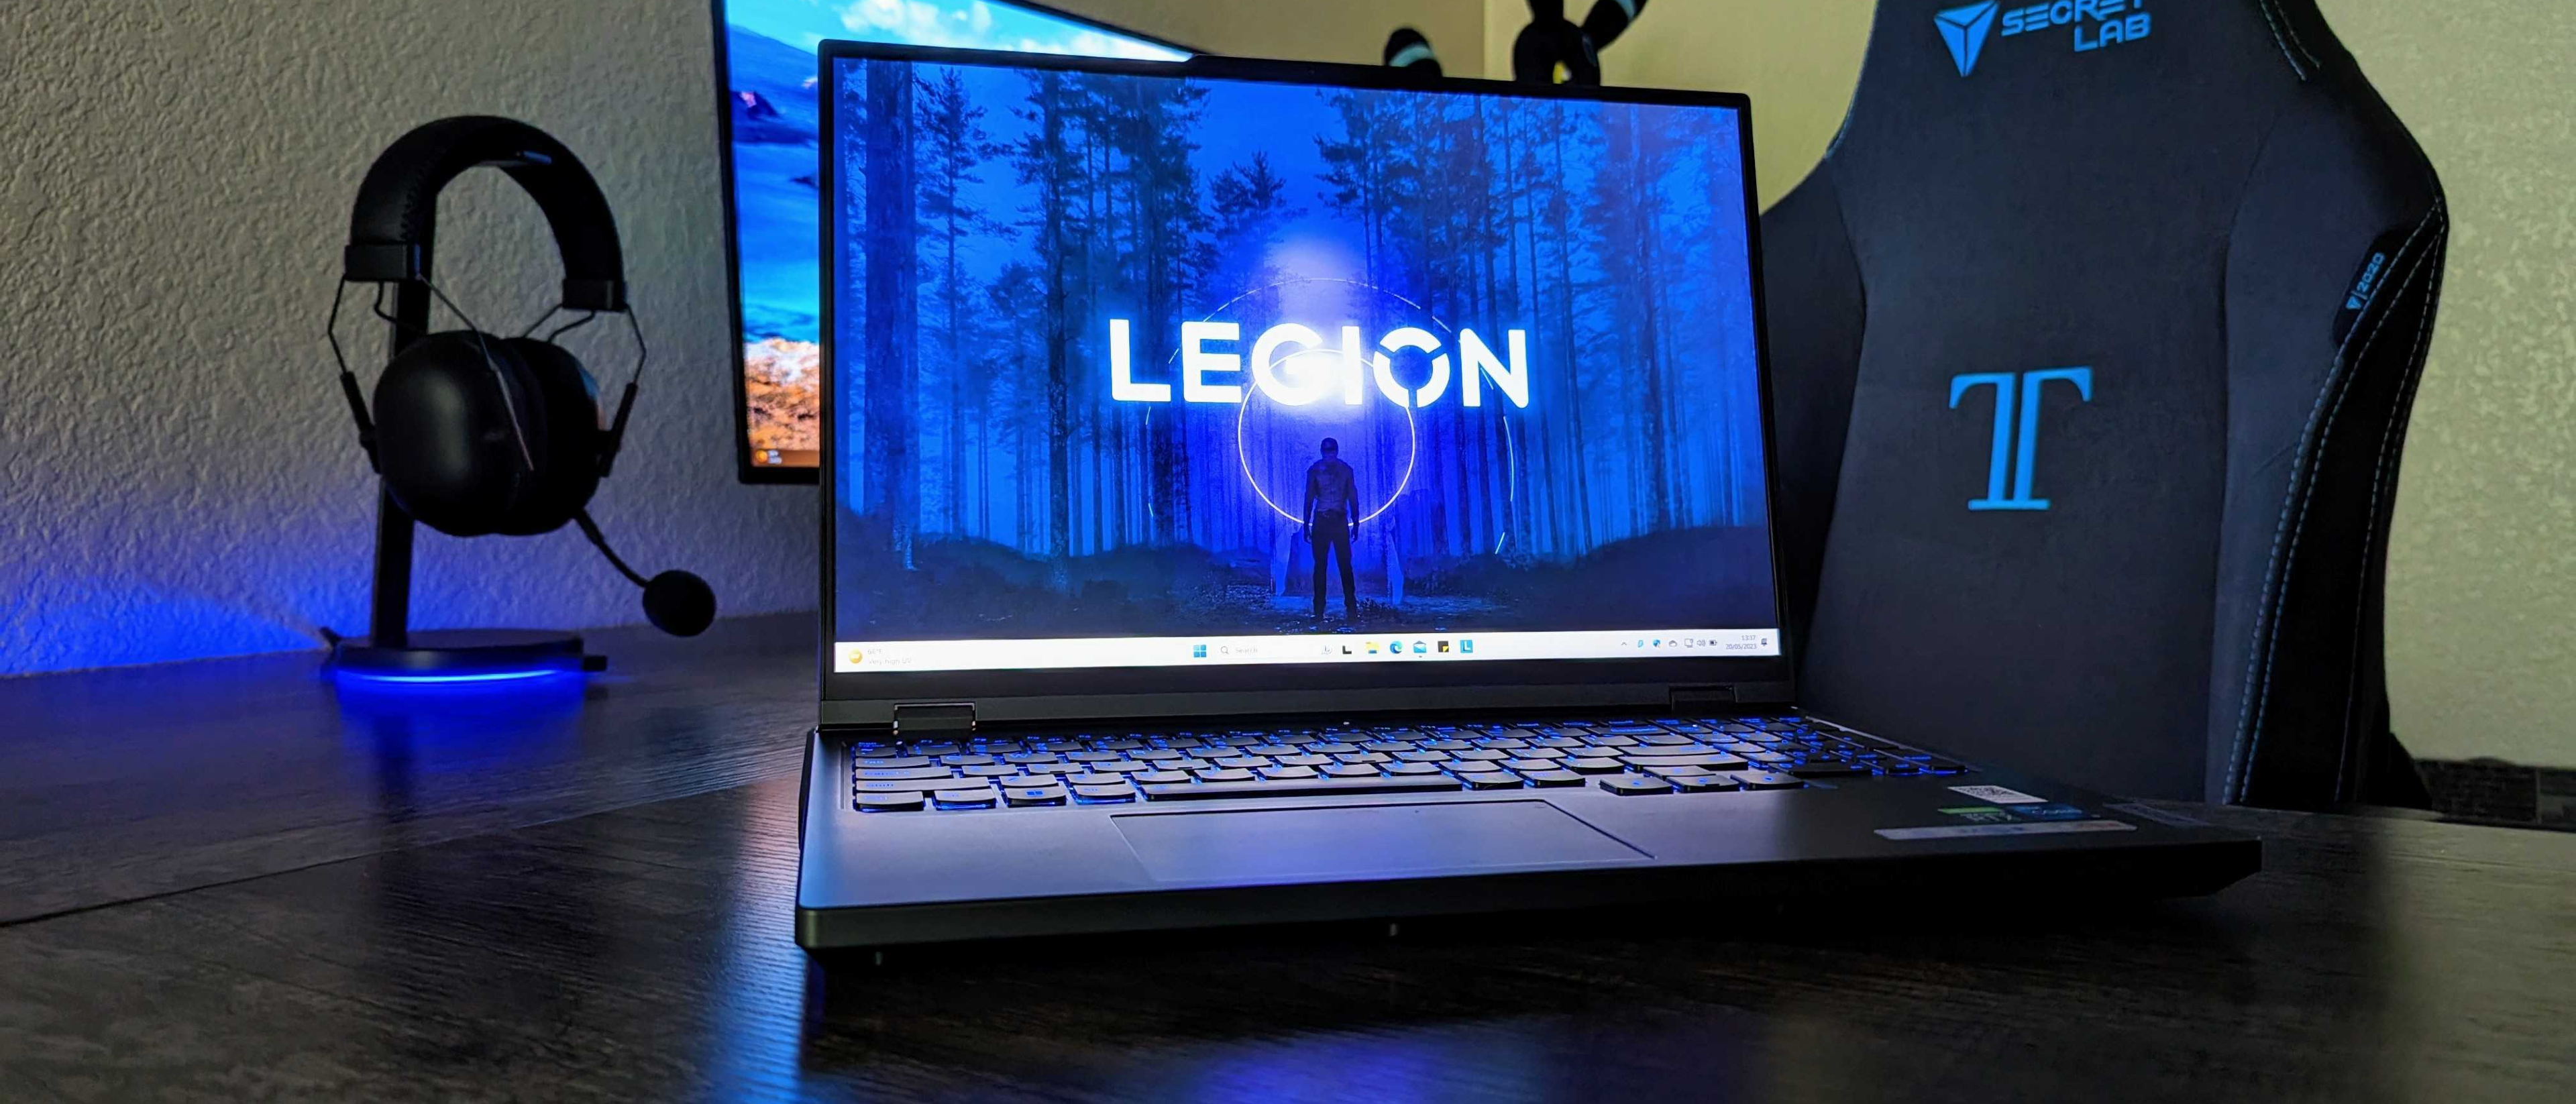 Lenovo Legion 5 Pro review: A solid gaming laptop at a superb